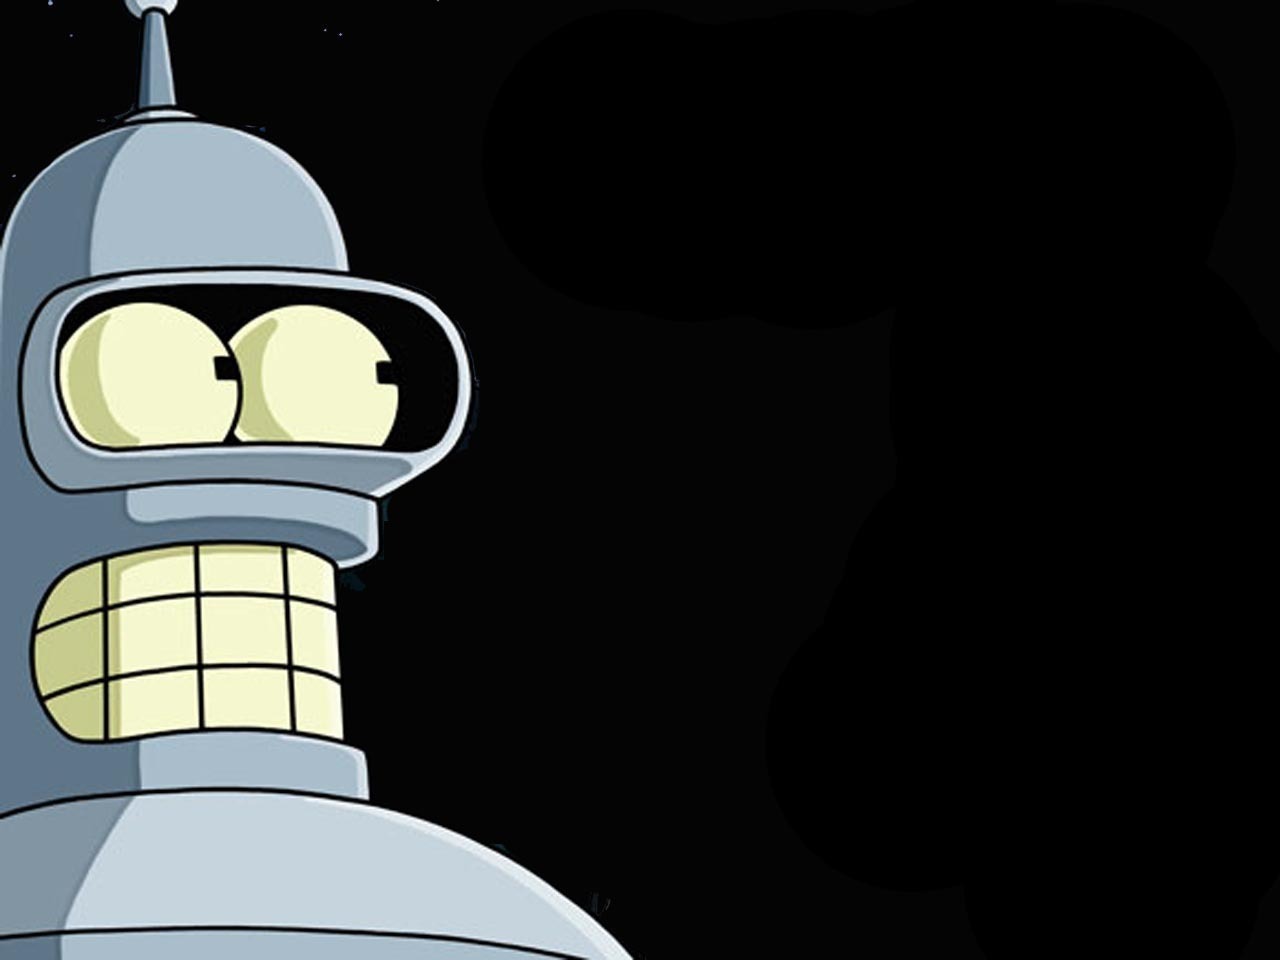 Bender Wallpaper On Their iPhone It Was Made By Grabbing